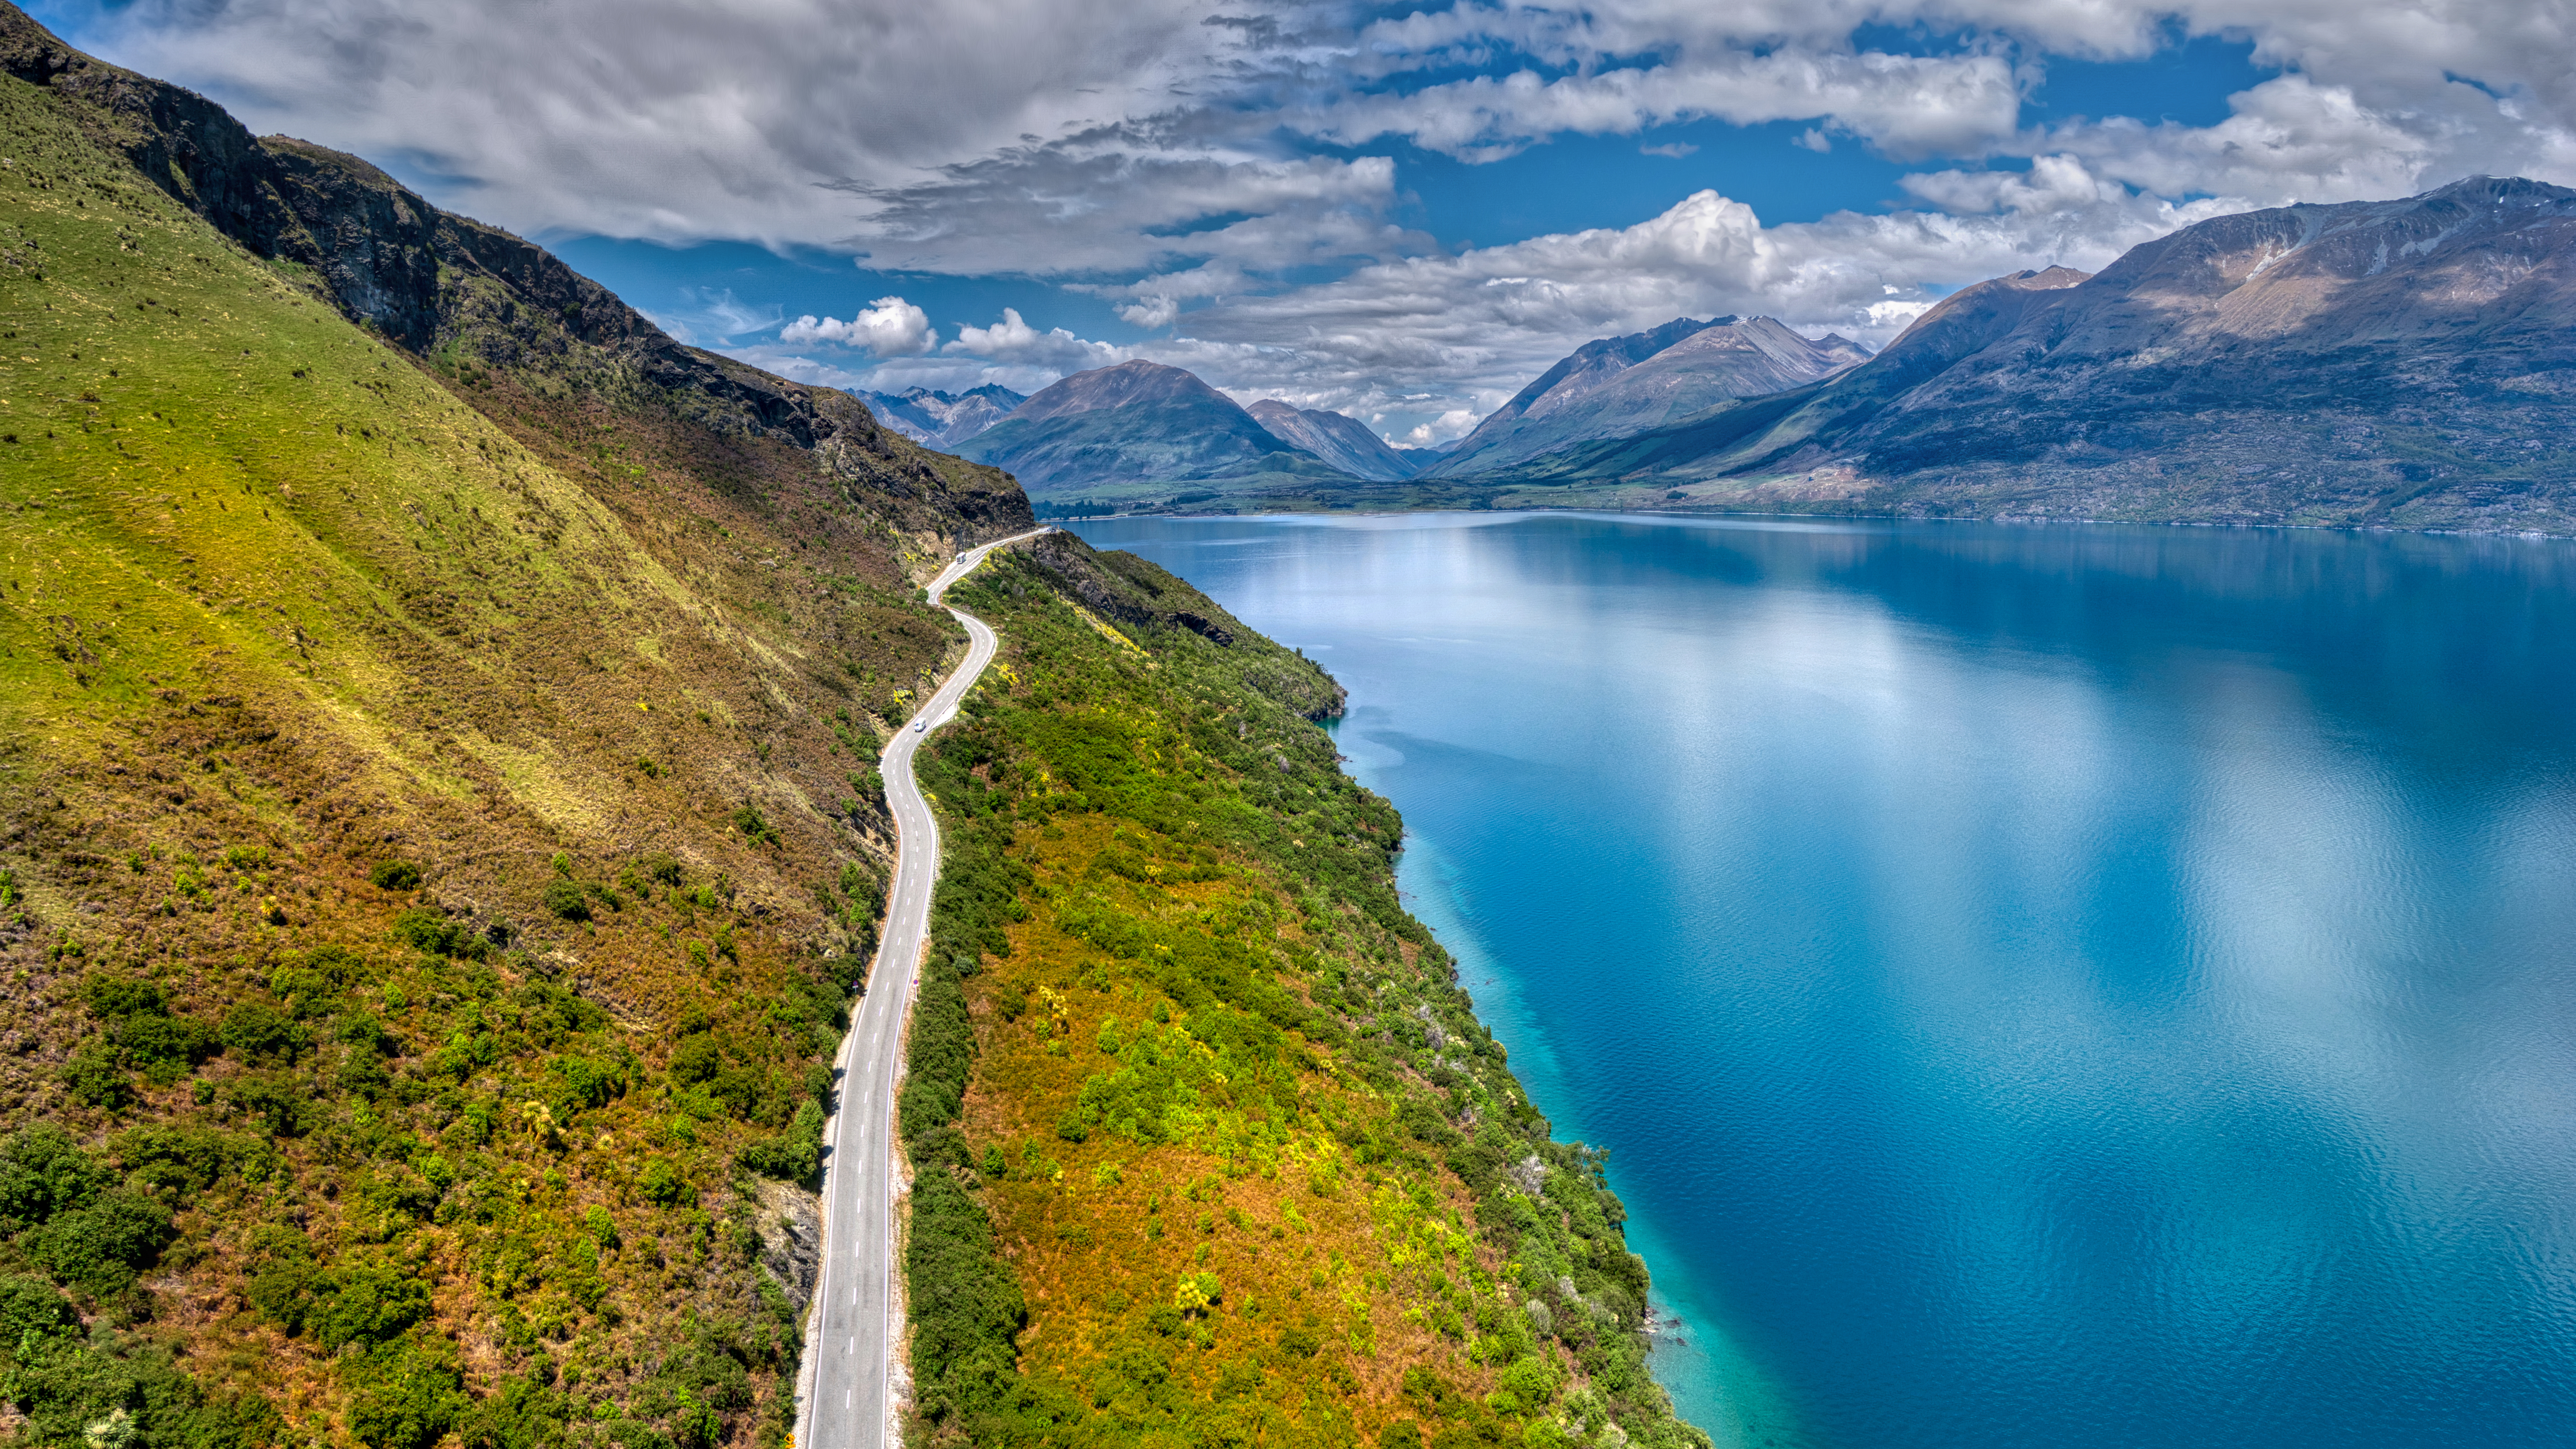 General 7680x4320 photography Trey Ratcliff landscape water mountains road sky clouds lake